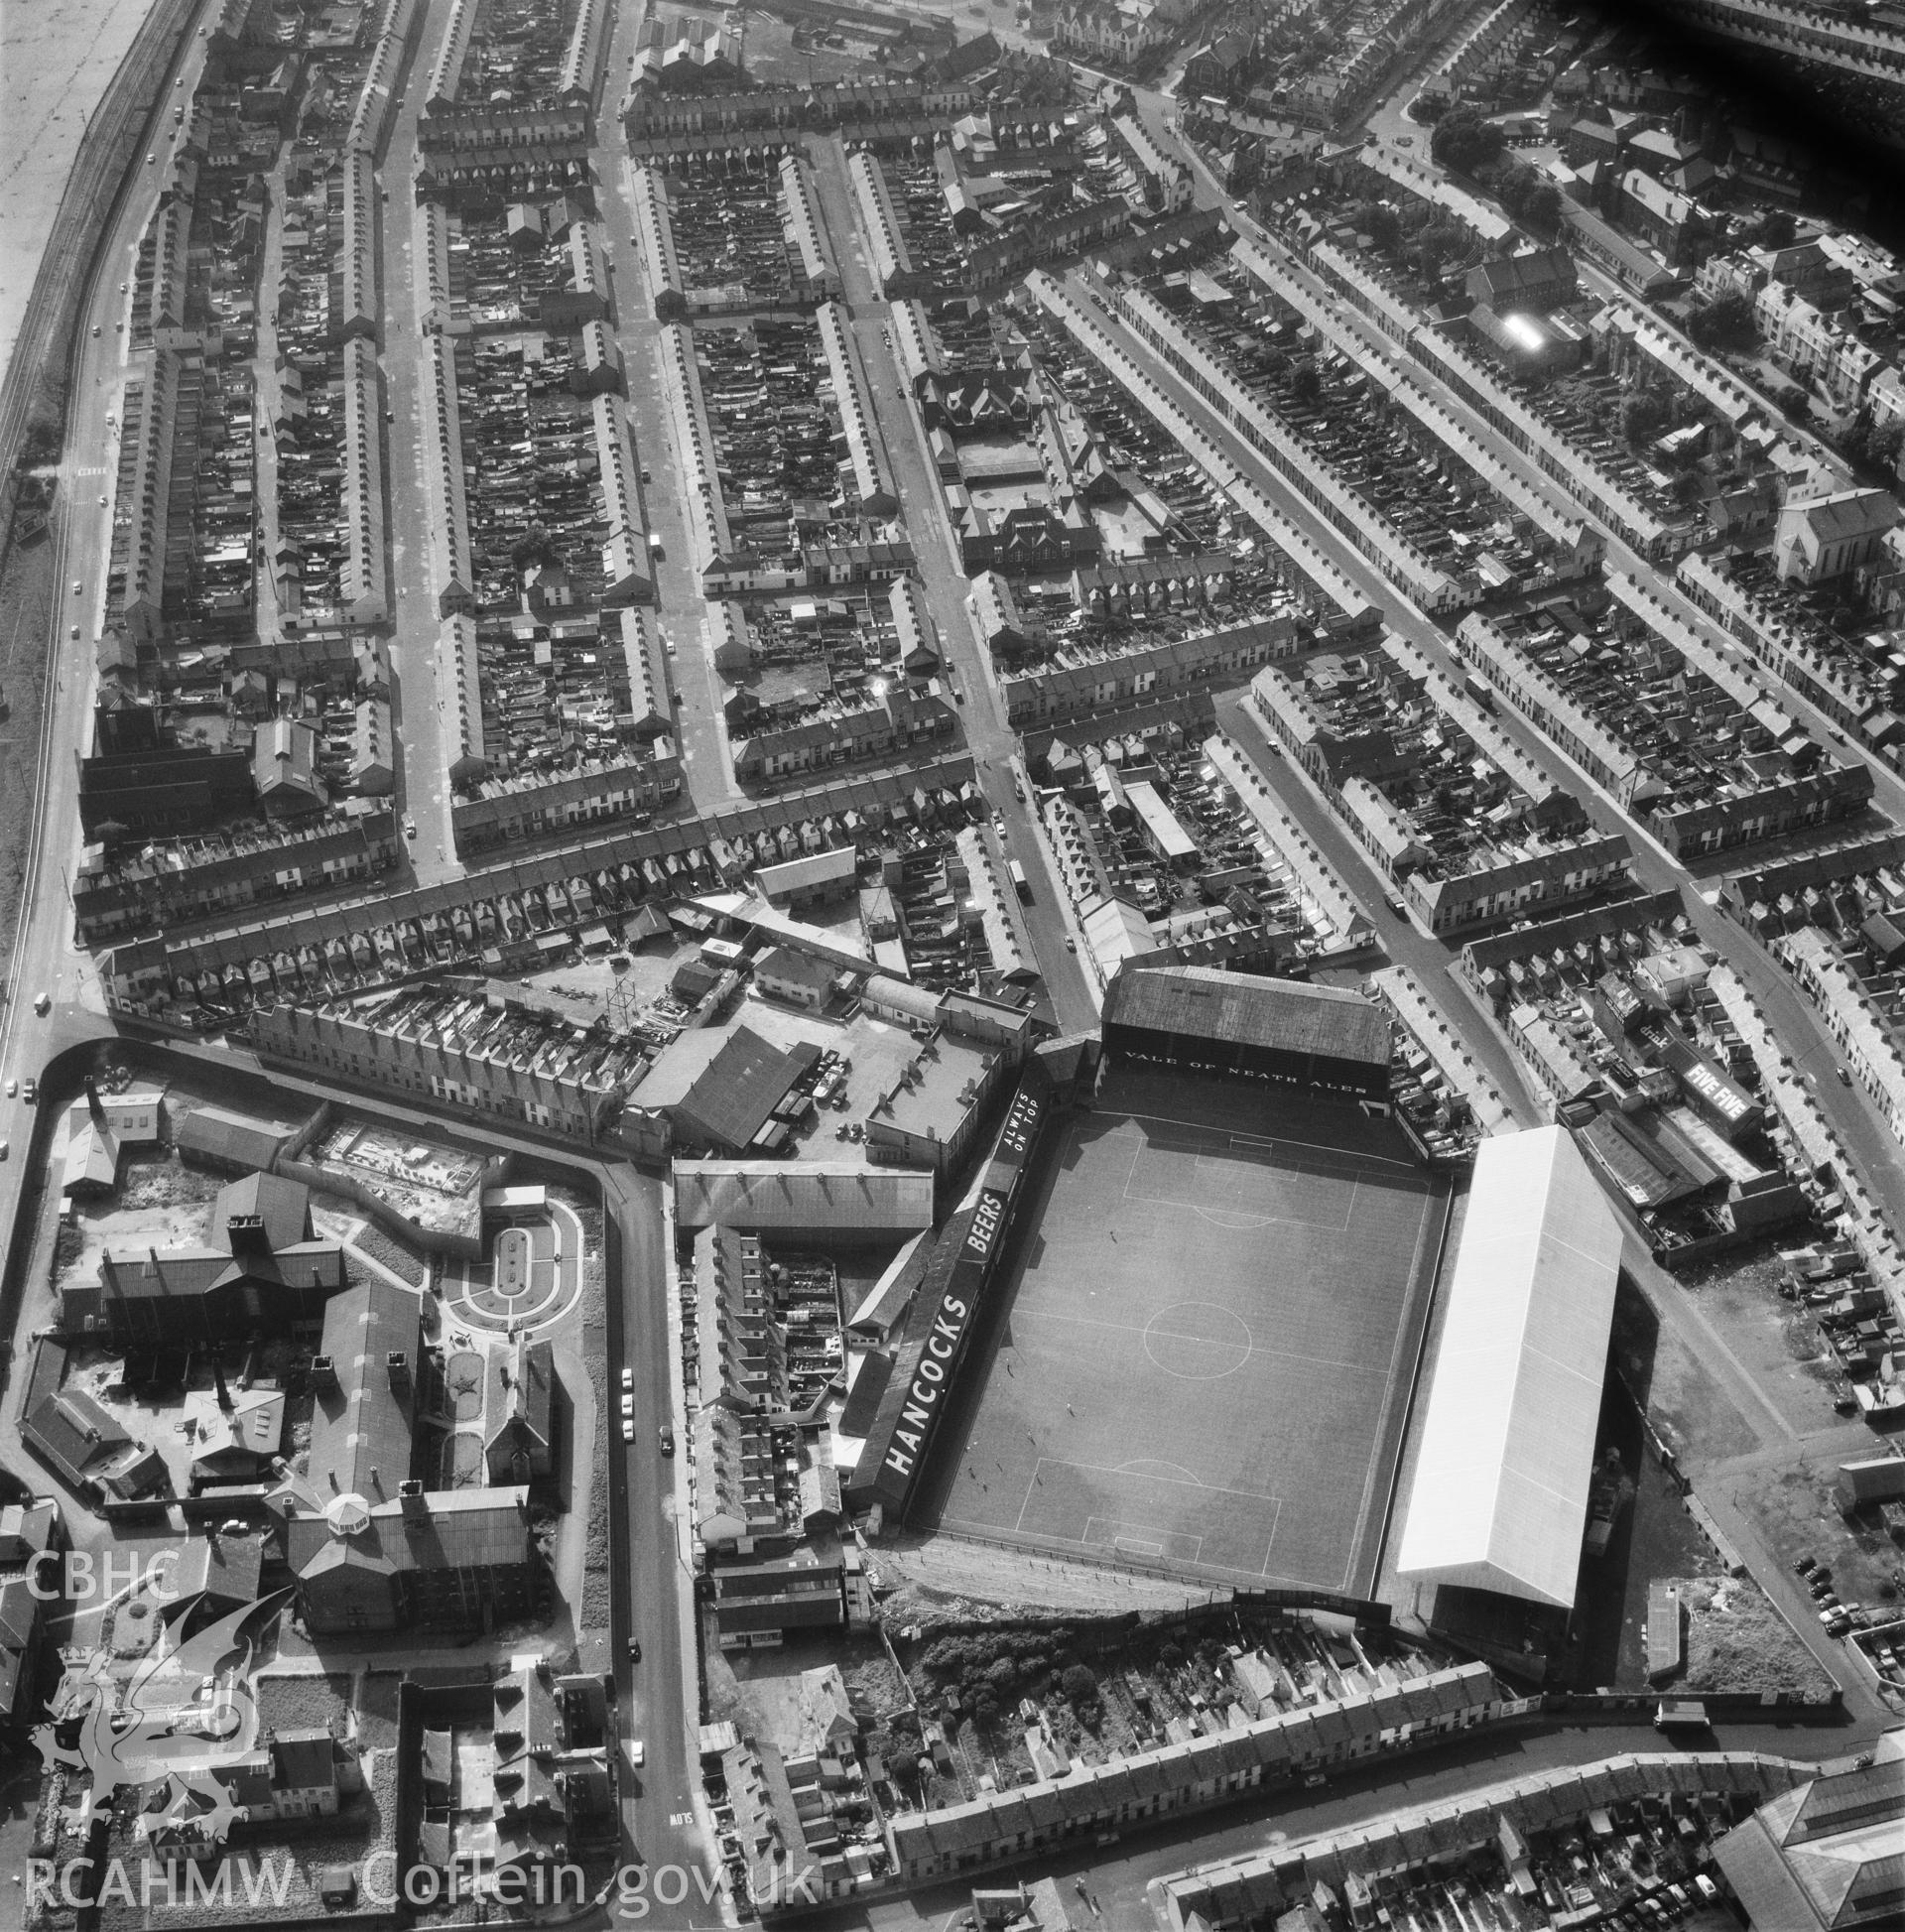 Black and white oblique aerial photograph showing the Vetch Field, Swansea and Swansea Prison, from Aerofilms album Swansea, taken by Aerofilms Ltd and dated 1959.